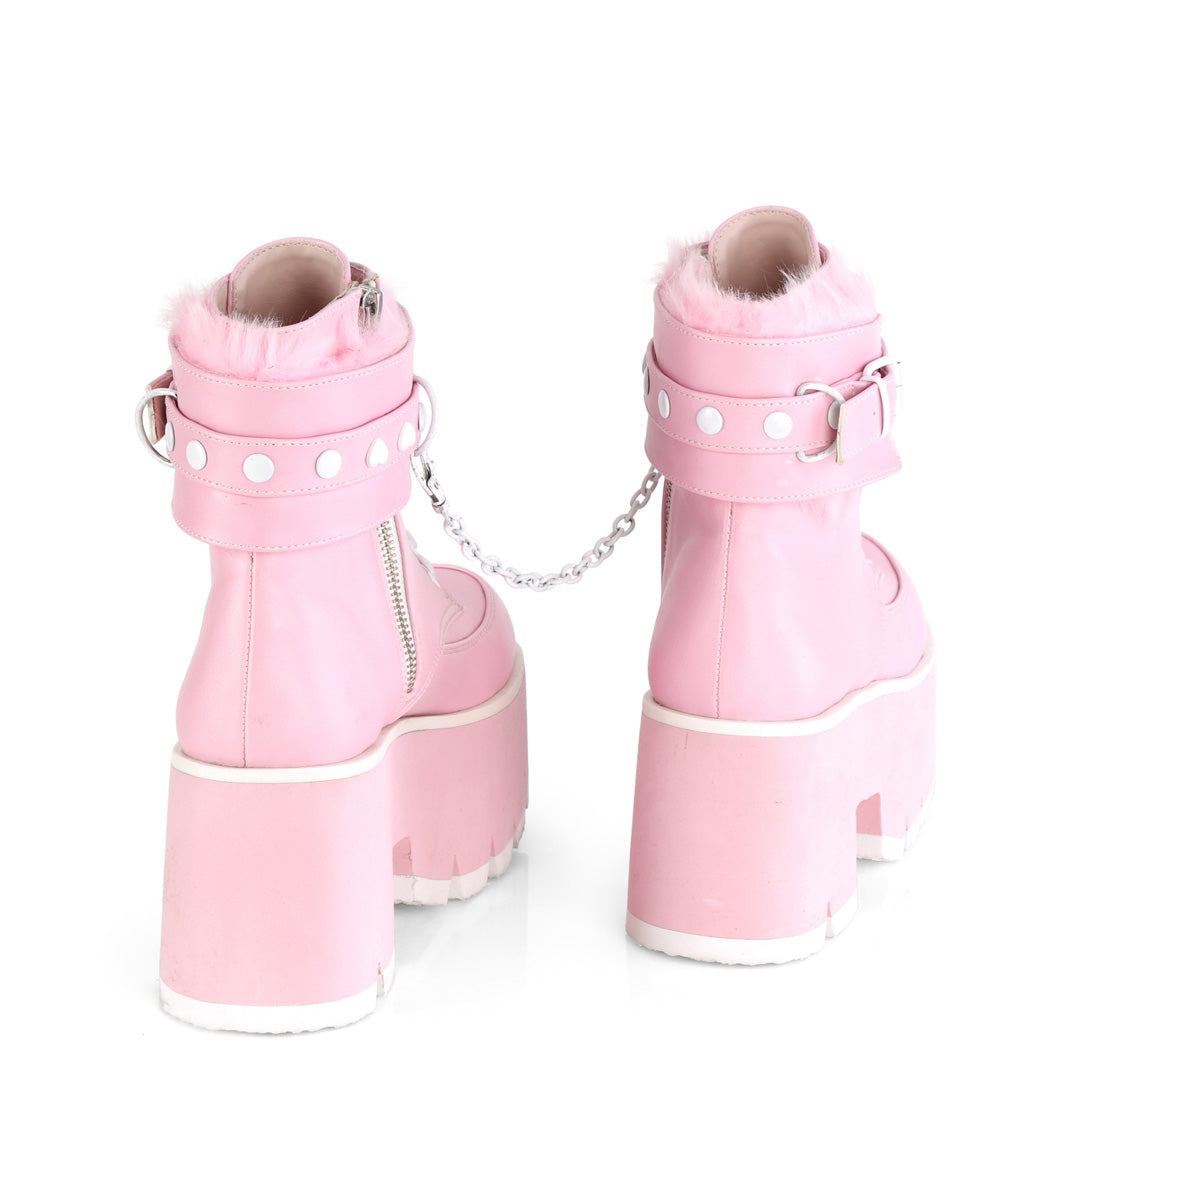 ASHES-57 Baby Pink Vegan Leather Ankle Boot Demonia